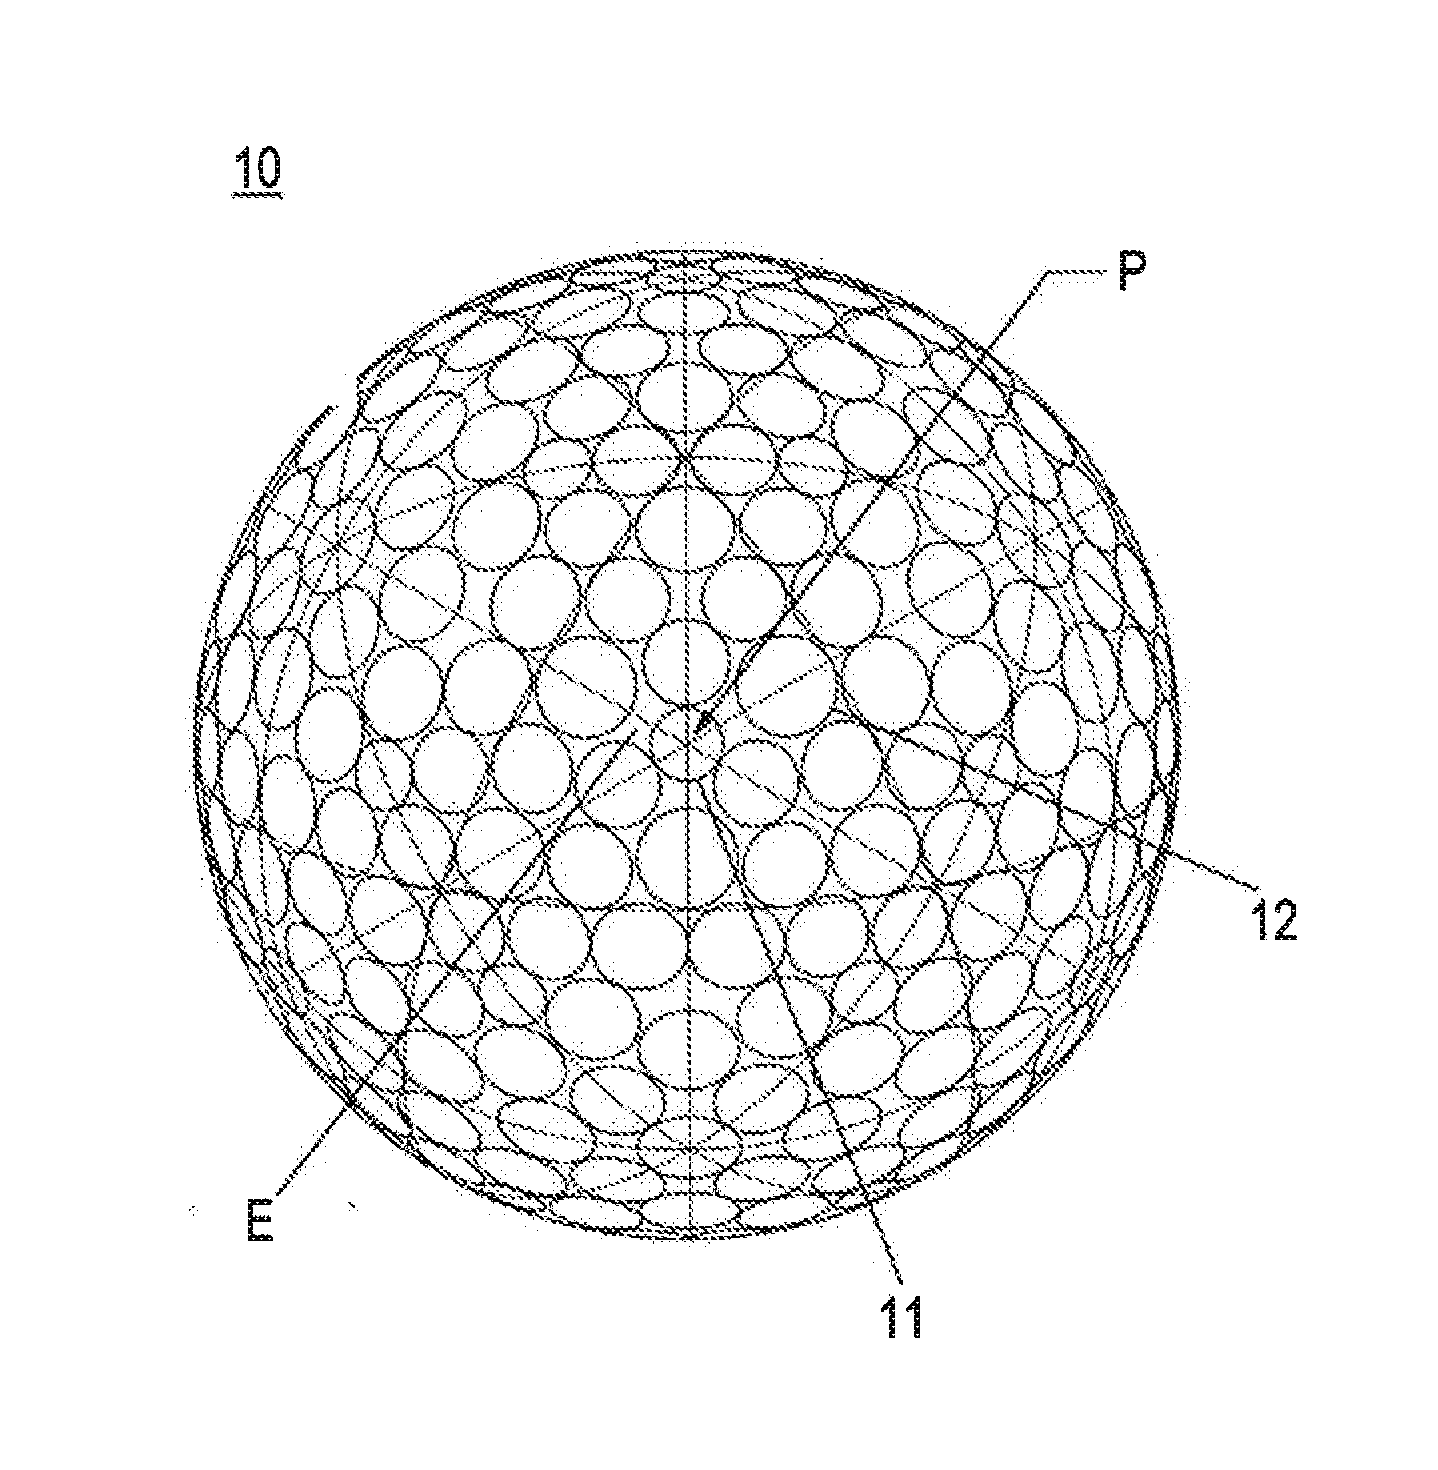 Dimple arrangement on the surface of a golf ball and the golf ball thereof